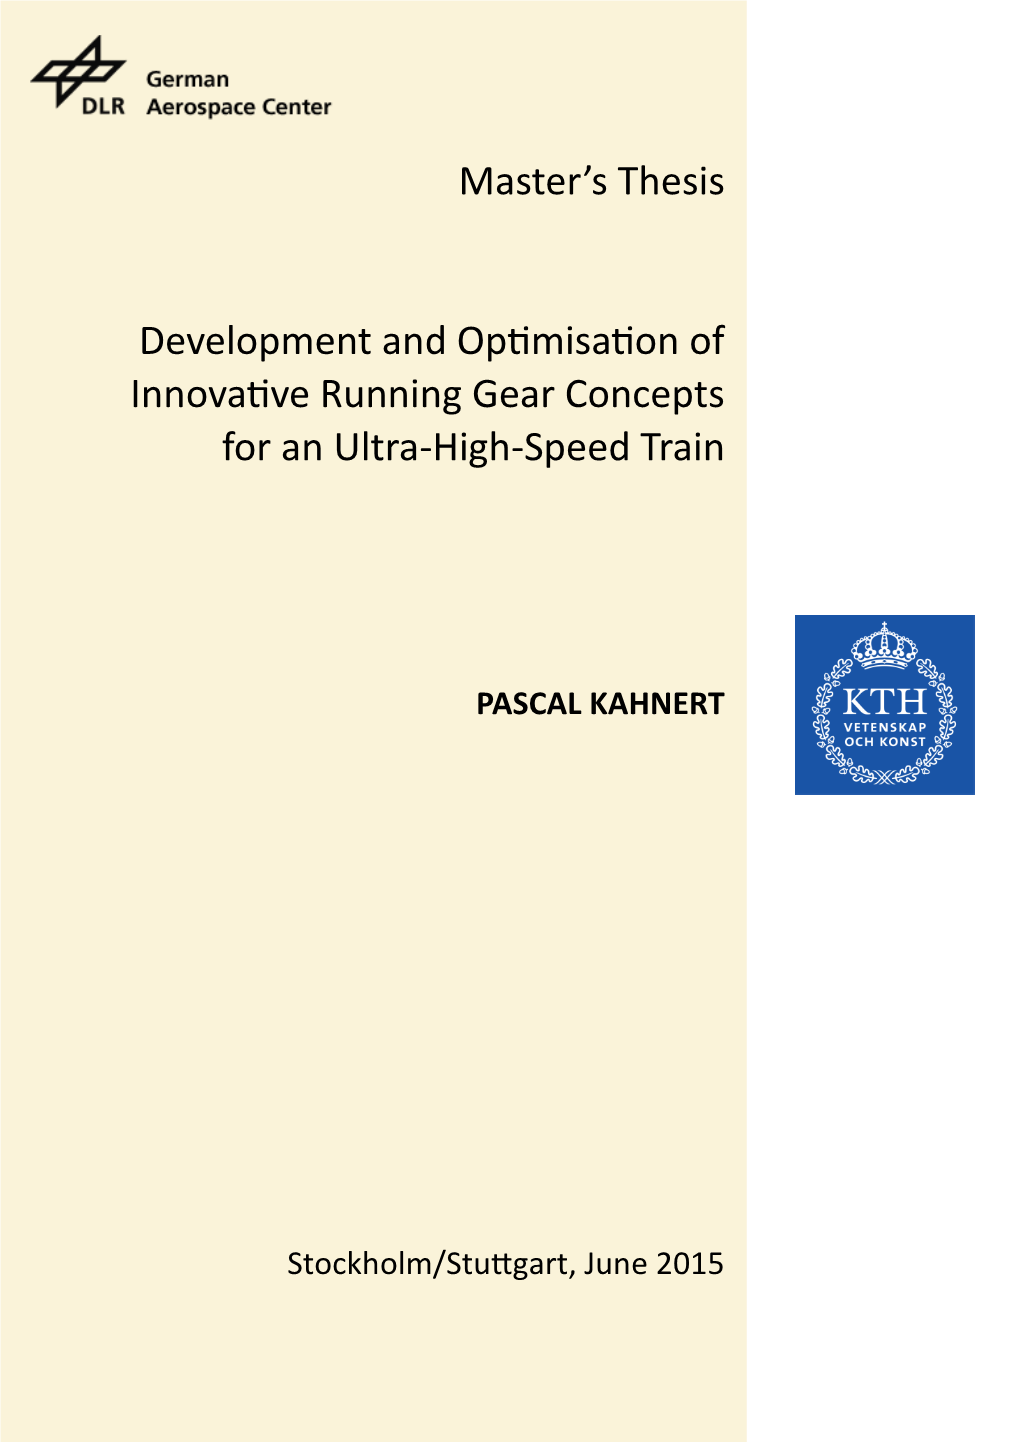 Development and Optimisation of Innovative Running Gear Concepts for an Ultra-High-Speed Train